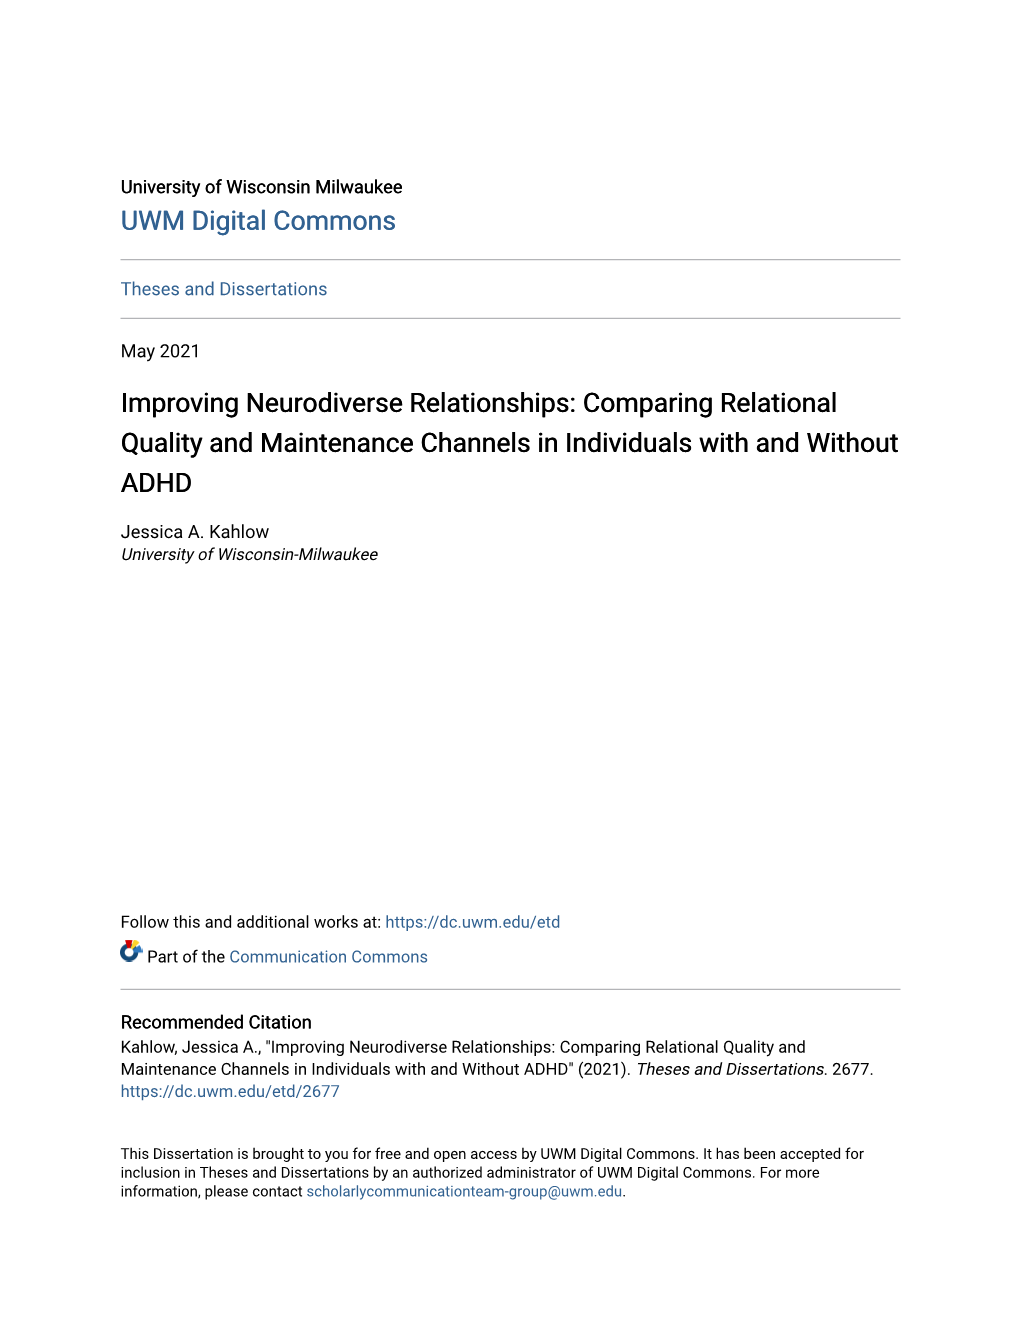 Improving Neurodiverse Relationships: Comparing Relational Quality and Maintenance Channels in Individuals with and Without ADHD